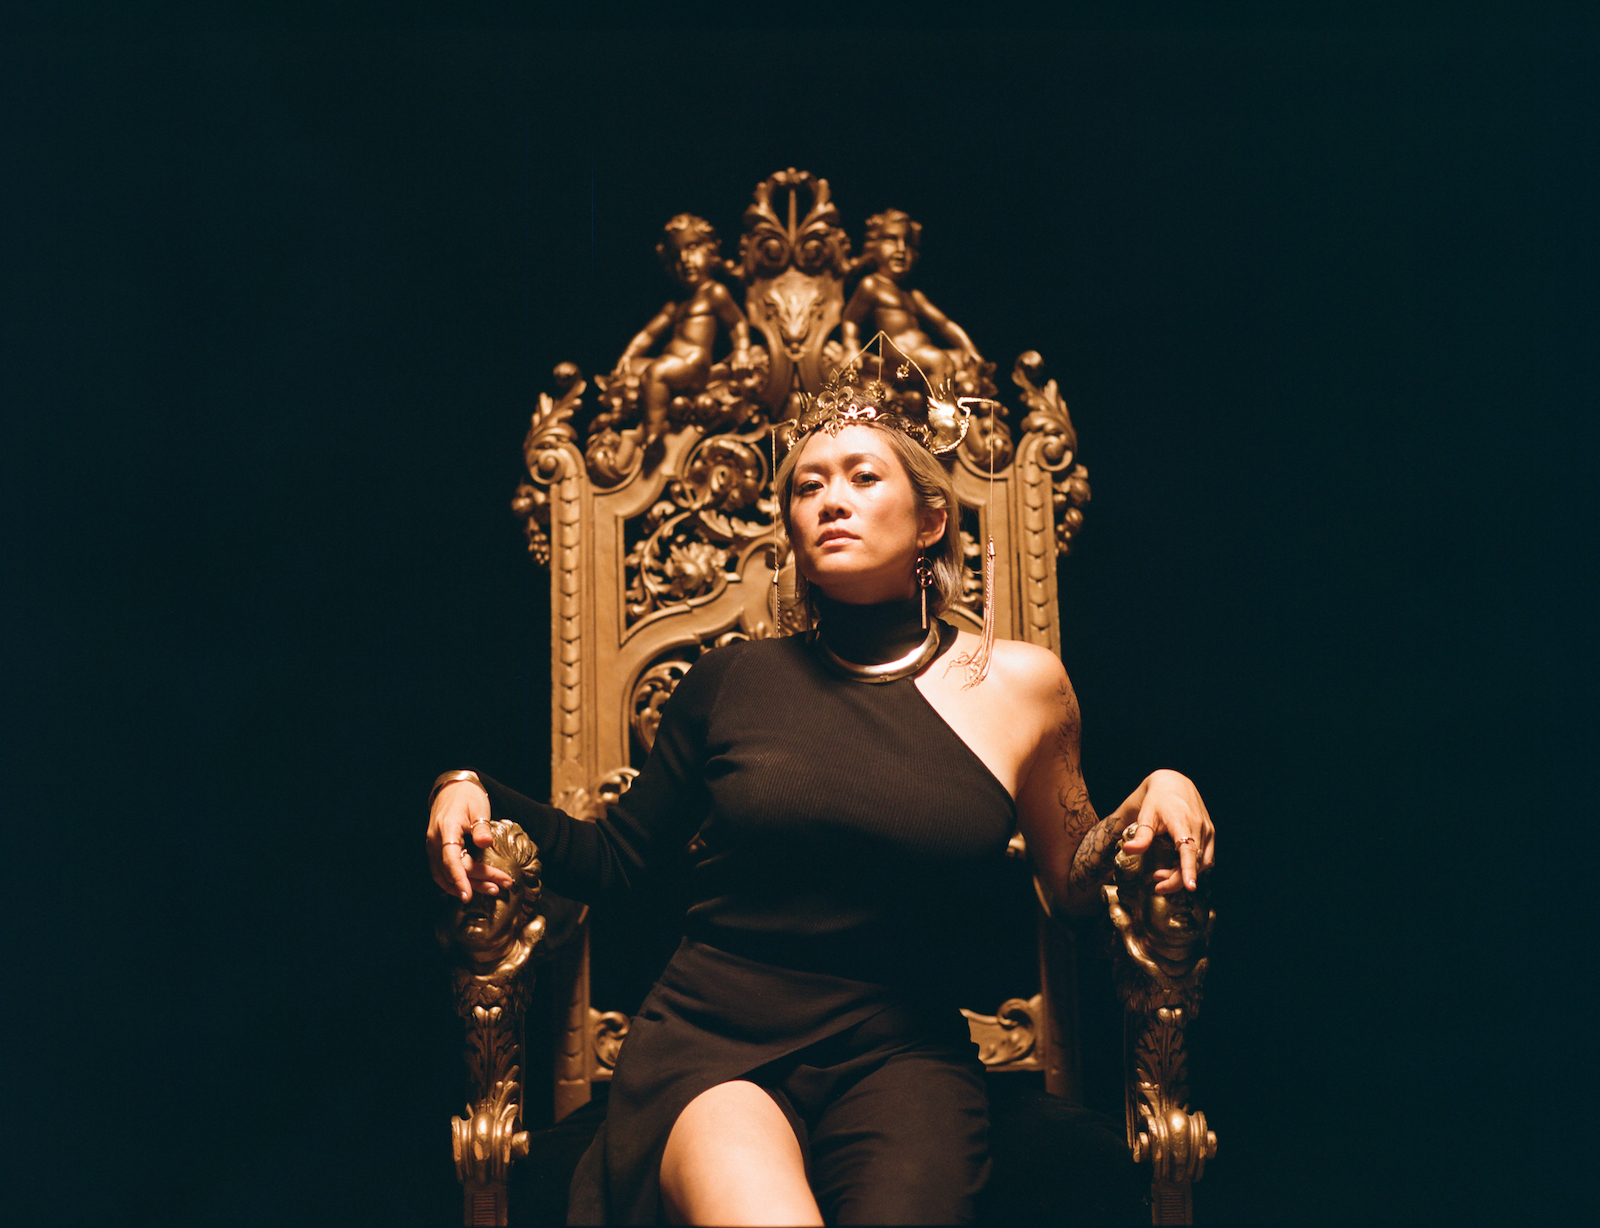 WHAT IF A WOMAN RULED THE WORLD? MILCK PREMIERES VISUALS ‘IF I RULED THE WORLD’: LADYGUNN EXCLUSIVE